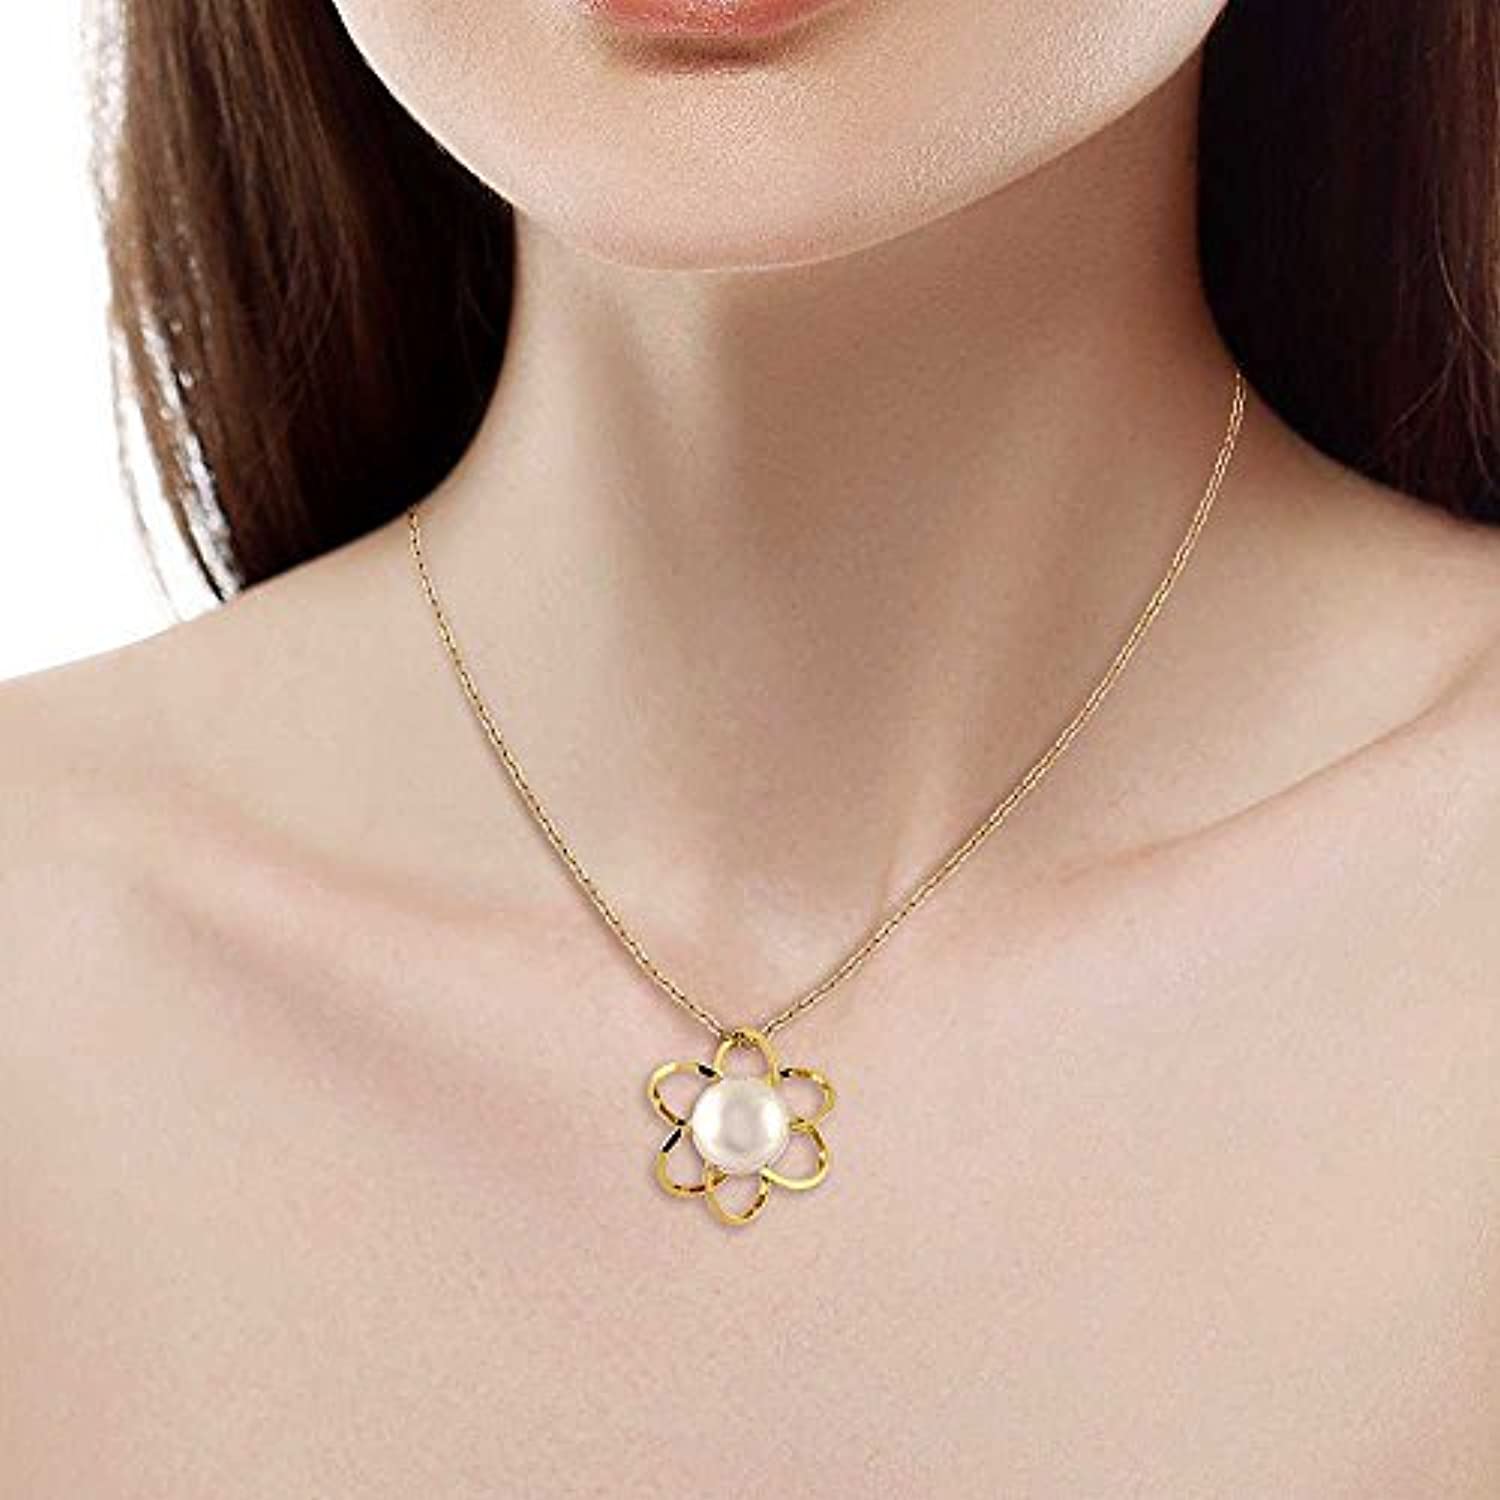 Yellow Gold Plated Cream Colored Cultured Freshwater Pearl Flower Pendant Necklace (8MM Round, with 18 Inch Chain)